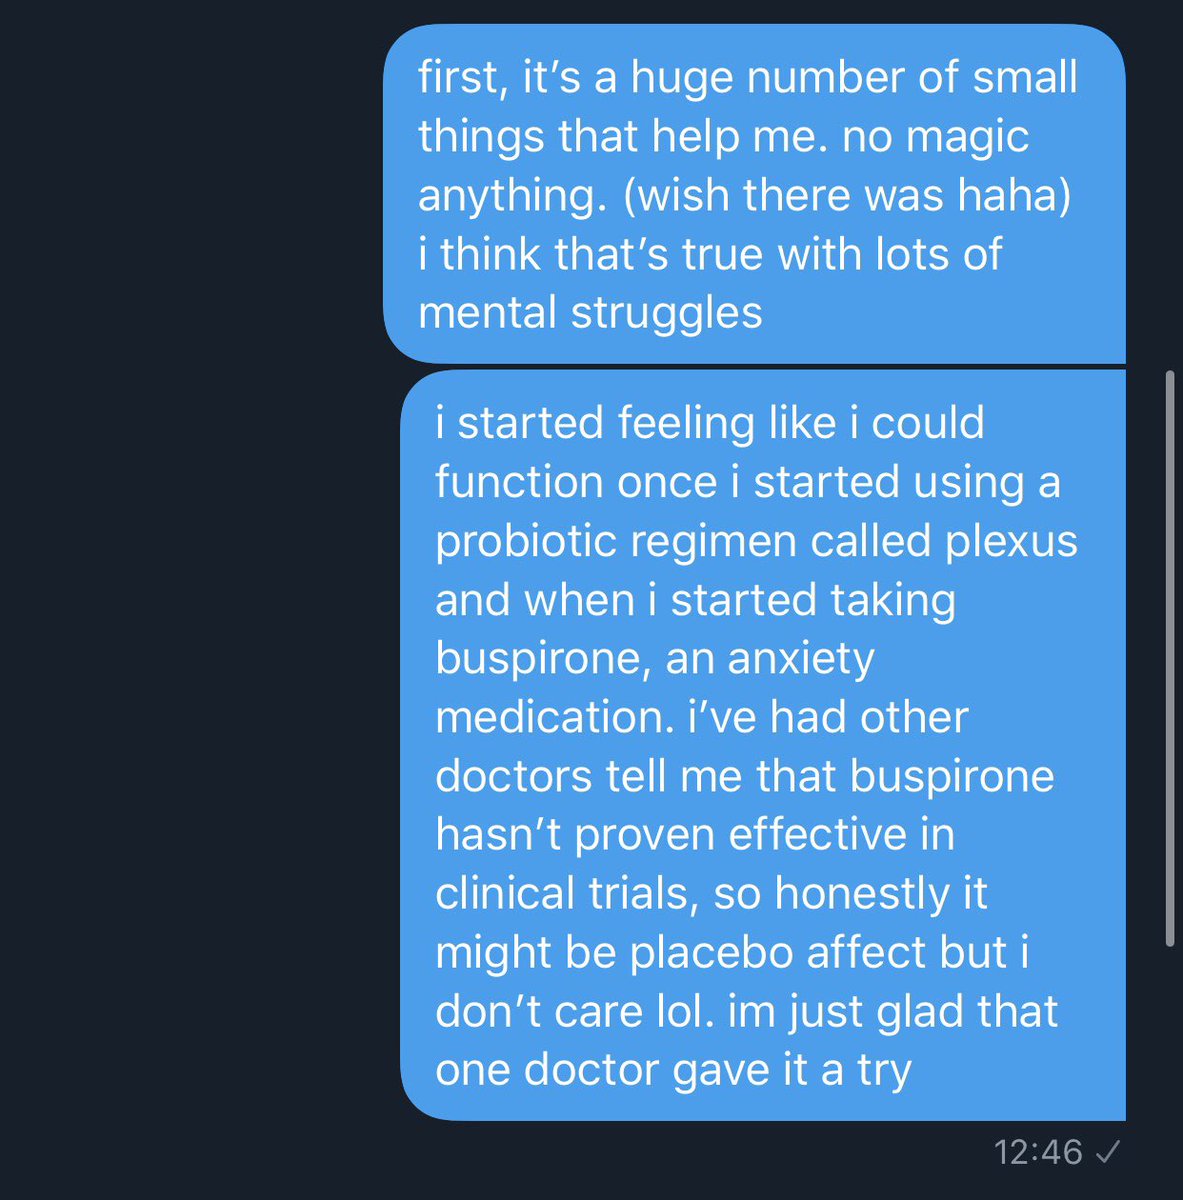 someone DM’d me asking for tips and here’s what i wrote up real fast: